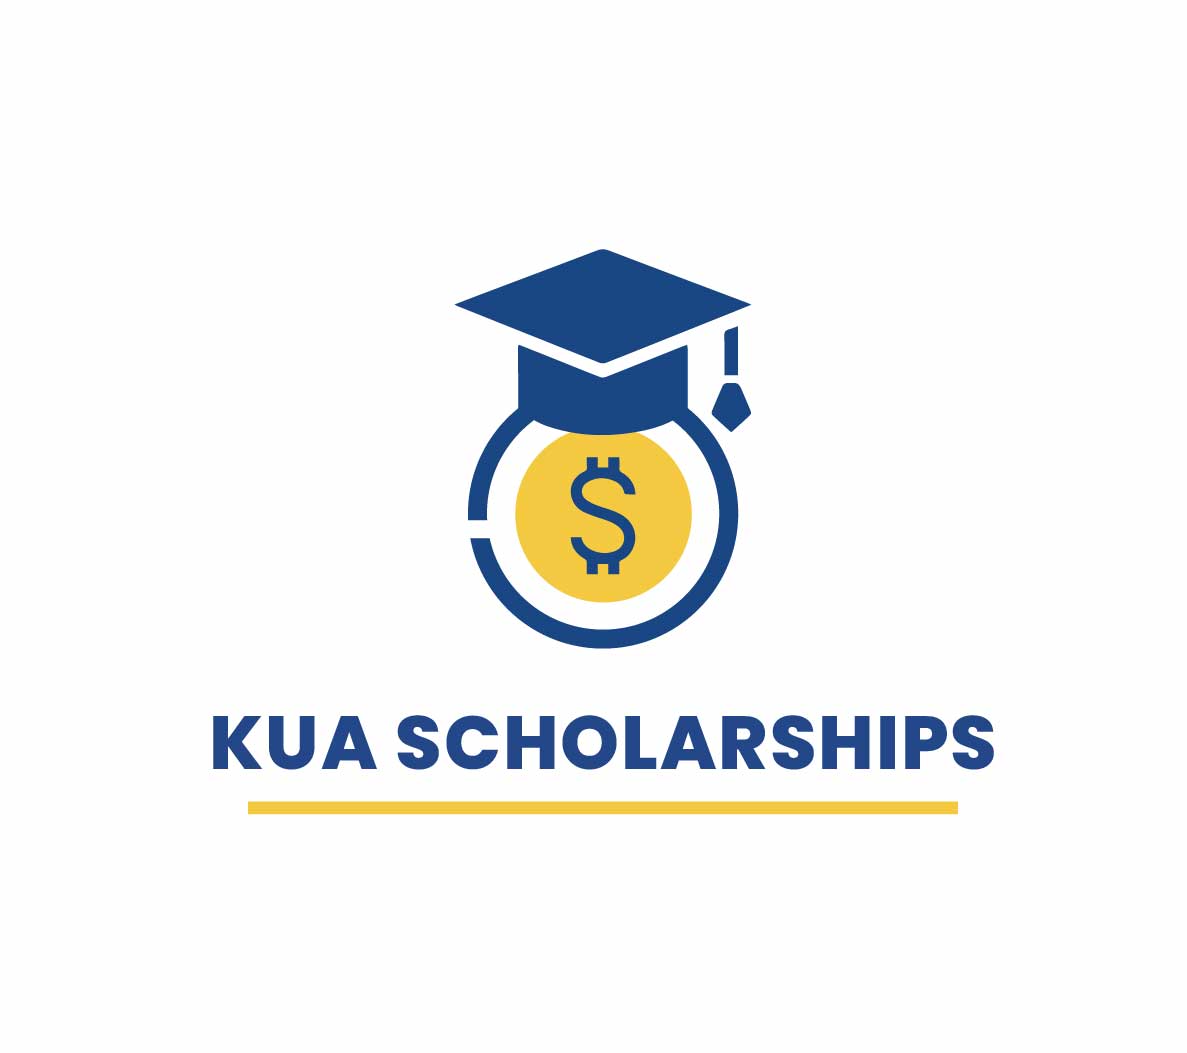 Click here to request KUA Scholarships